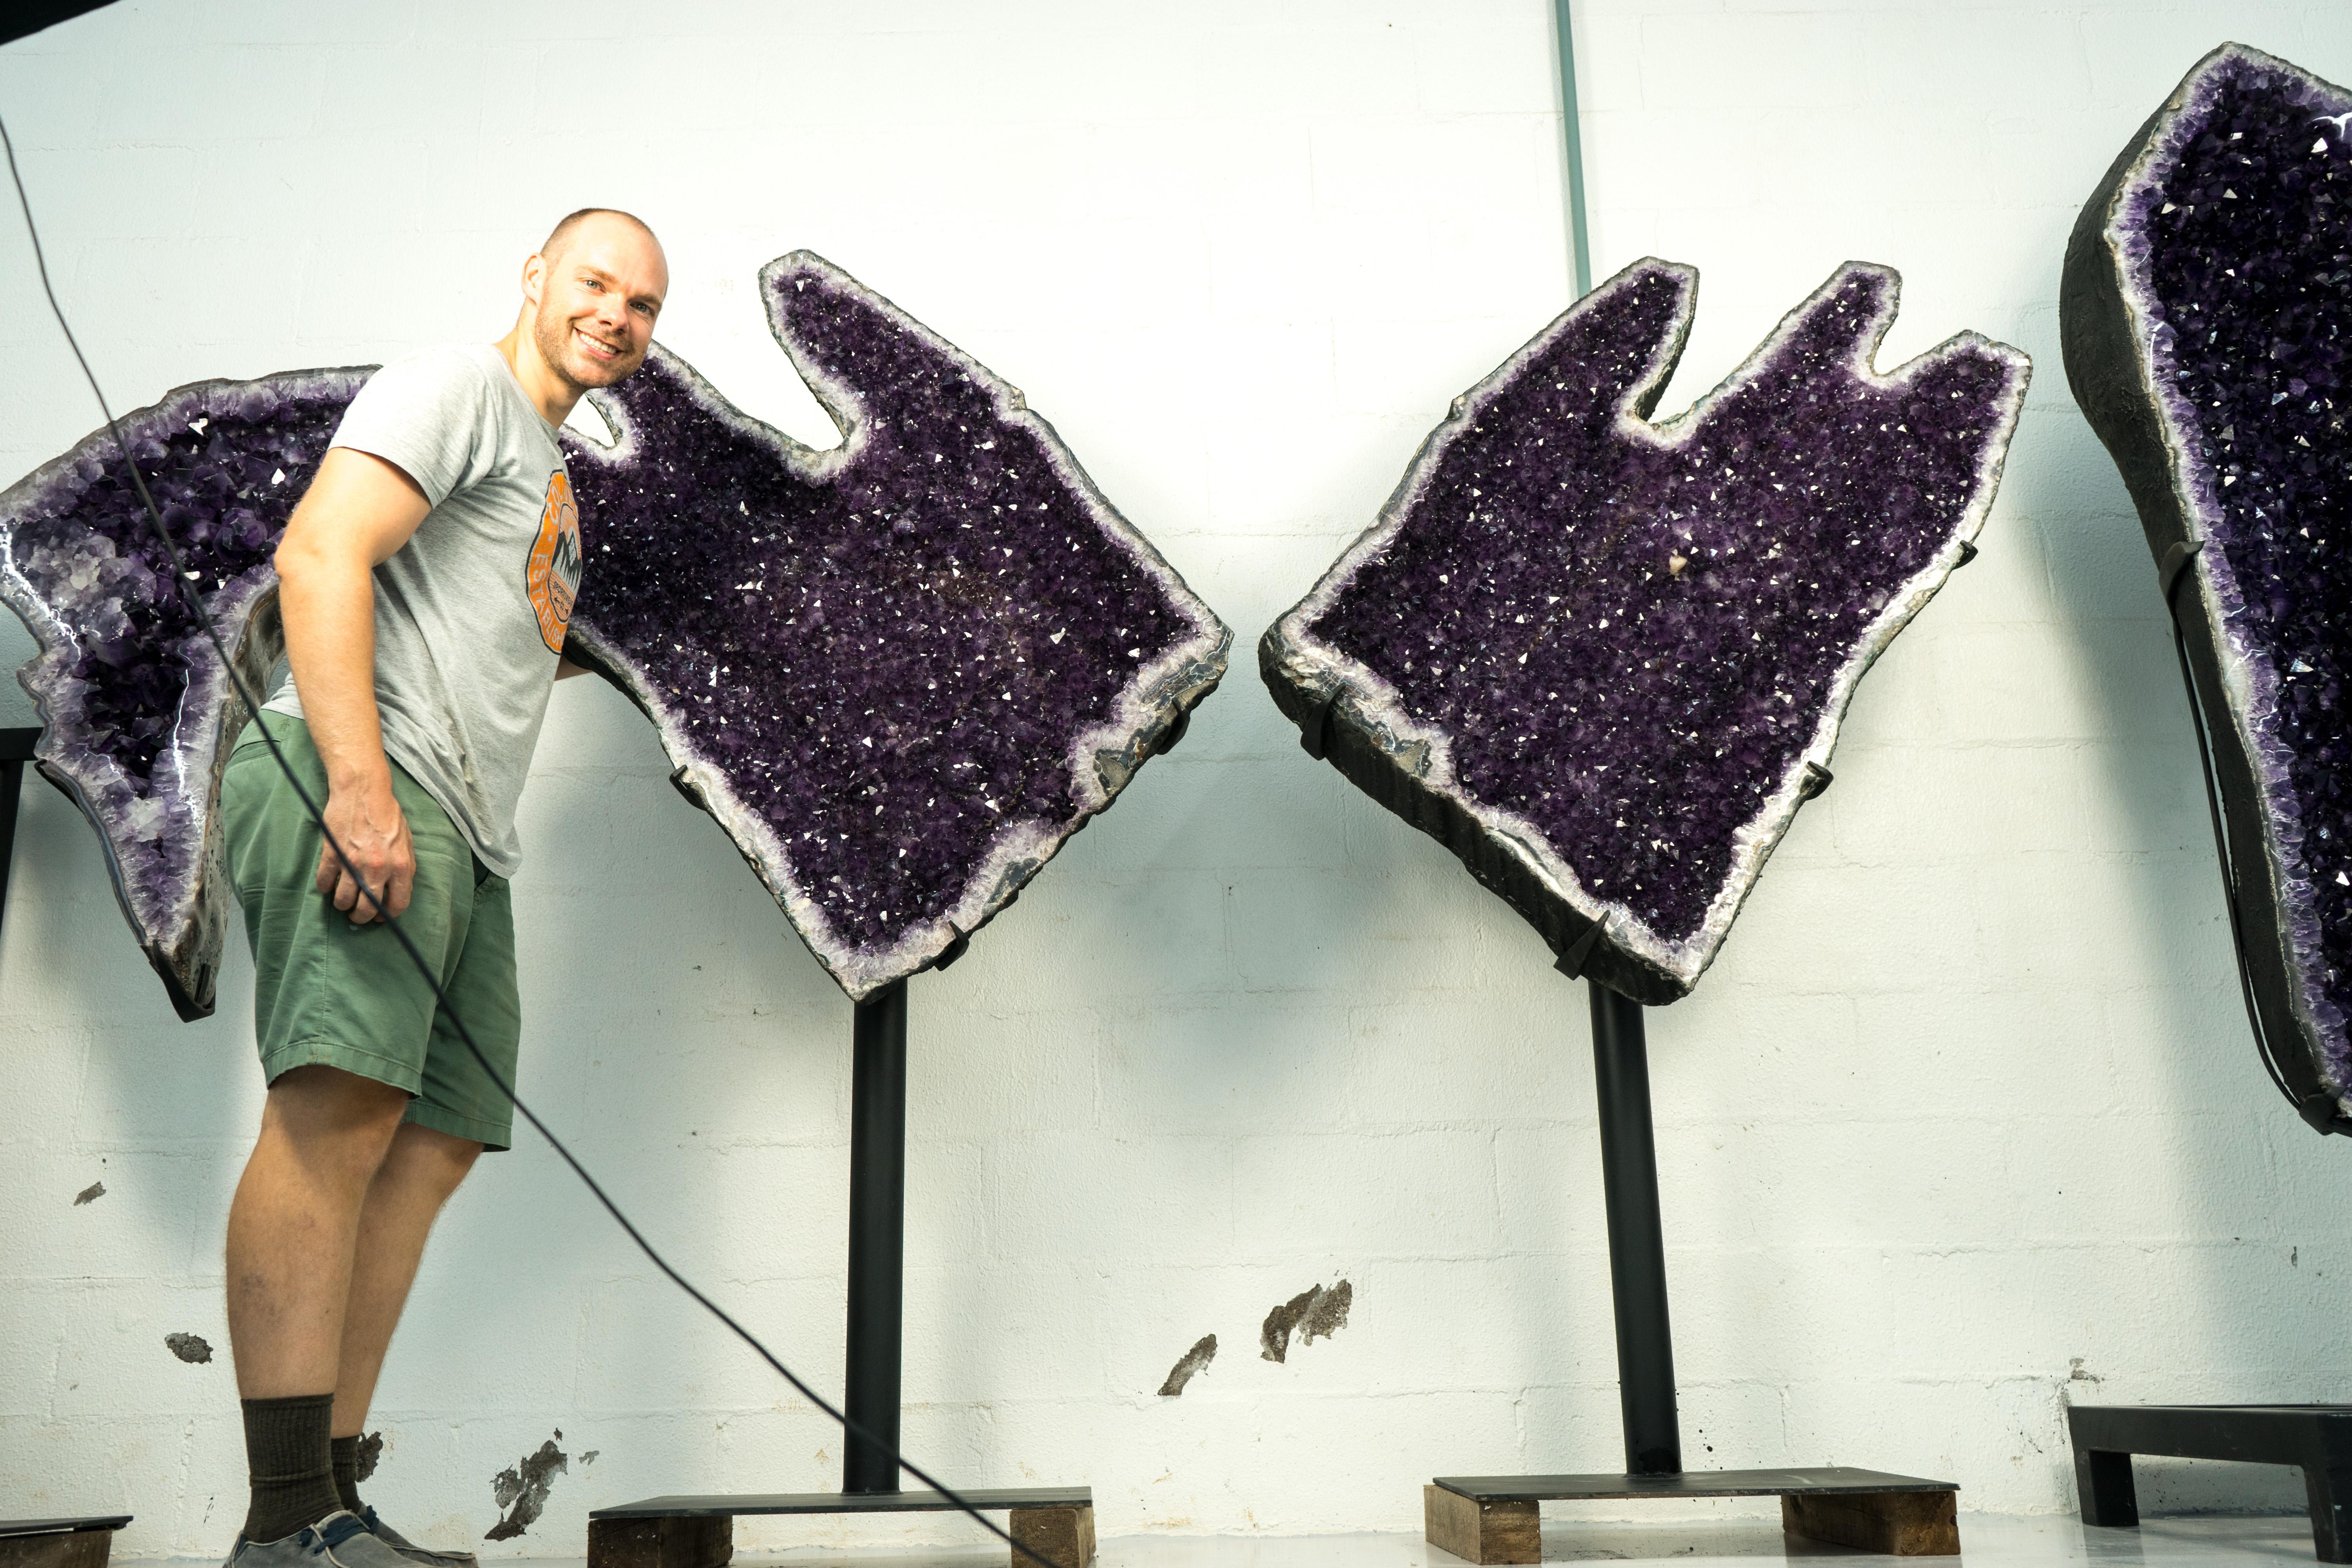 Sculptural Giant Amethyst Geodes

▫️ Description

A rare pair of Amethyst Geodes towers with royal presence. These majestic specimens showcase shimmering, high-grade, deep purple amethyst crystals, creating a spectacular natural sculpture that will